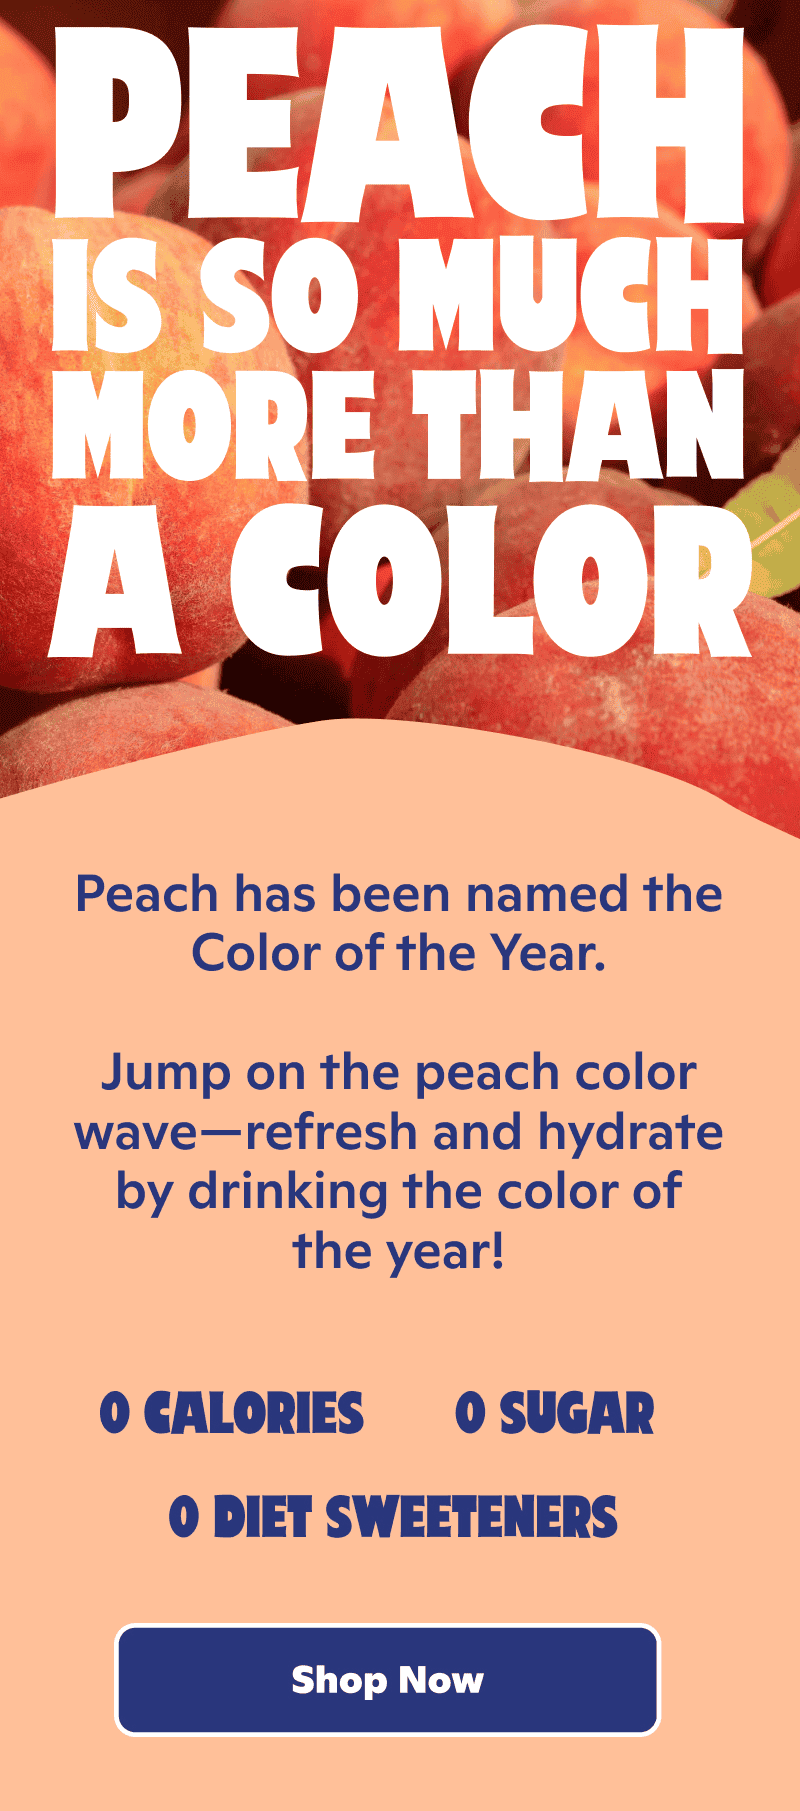 Peach is so much more than just a color. Jump on the peach color wave by drinking the color of the year!